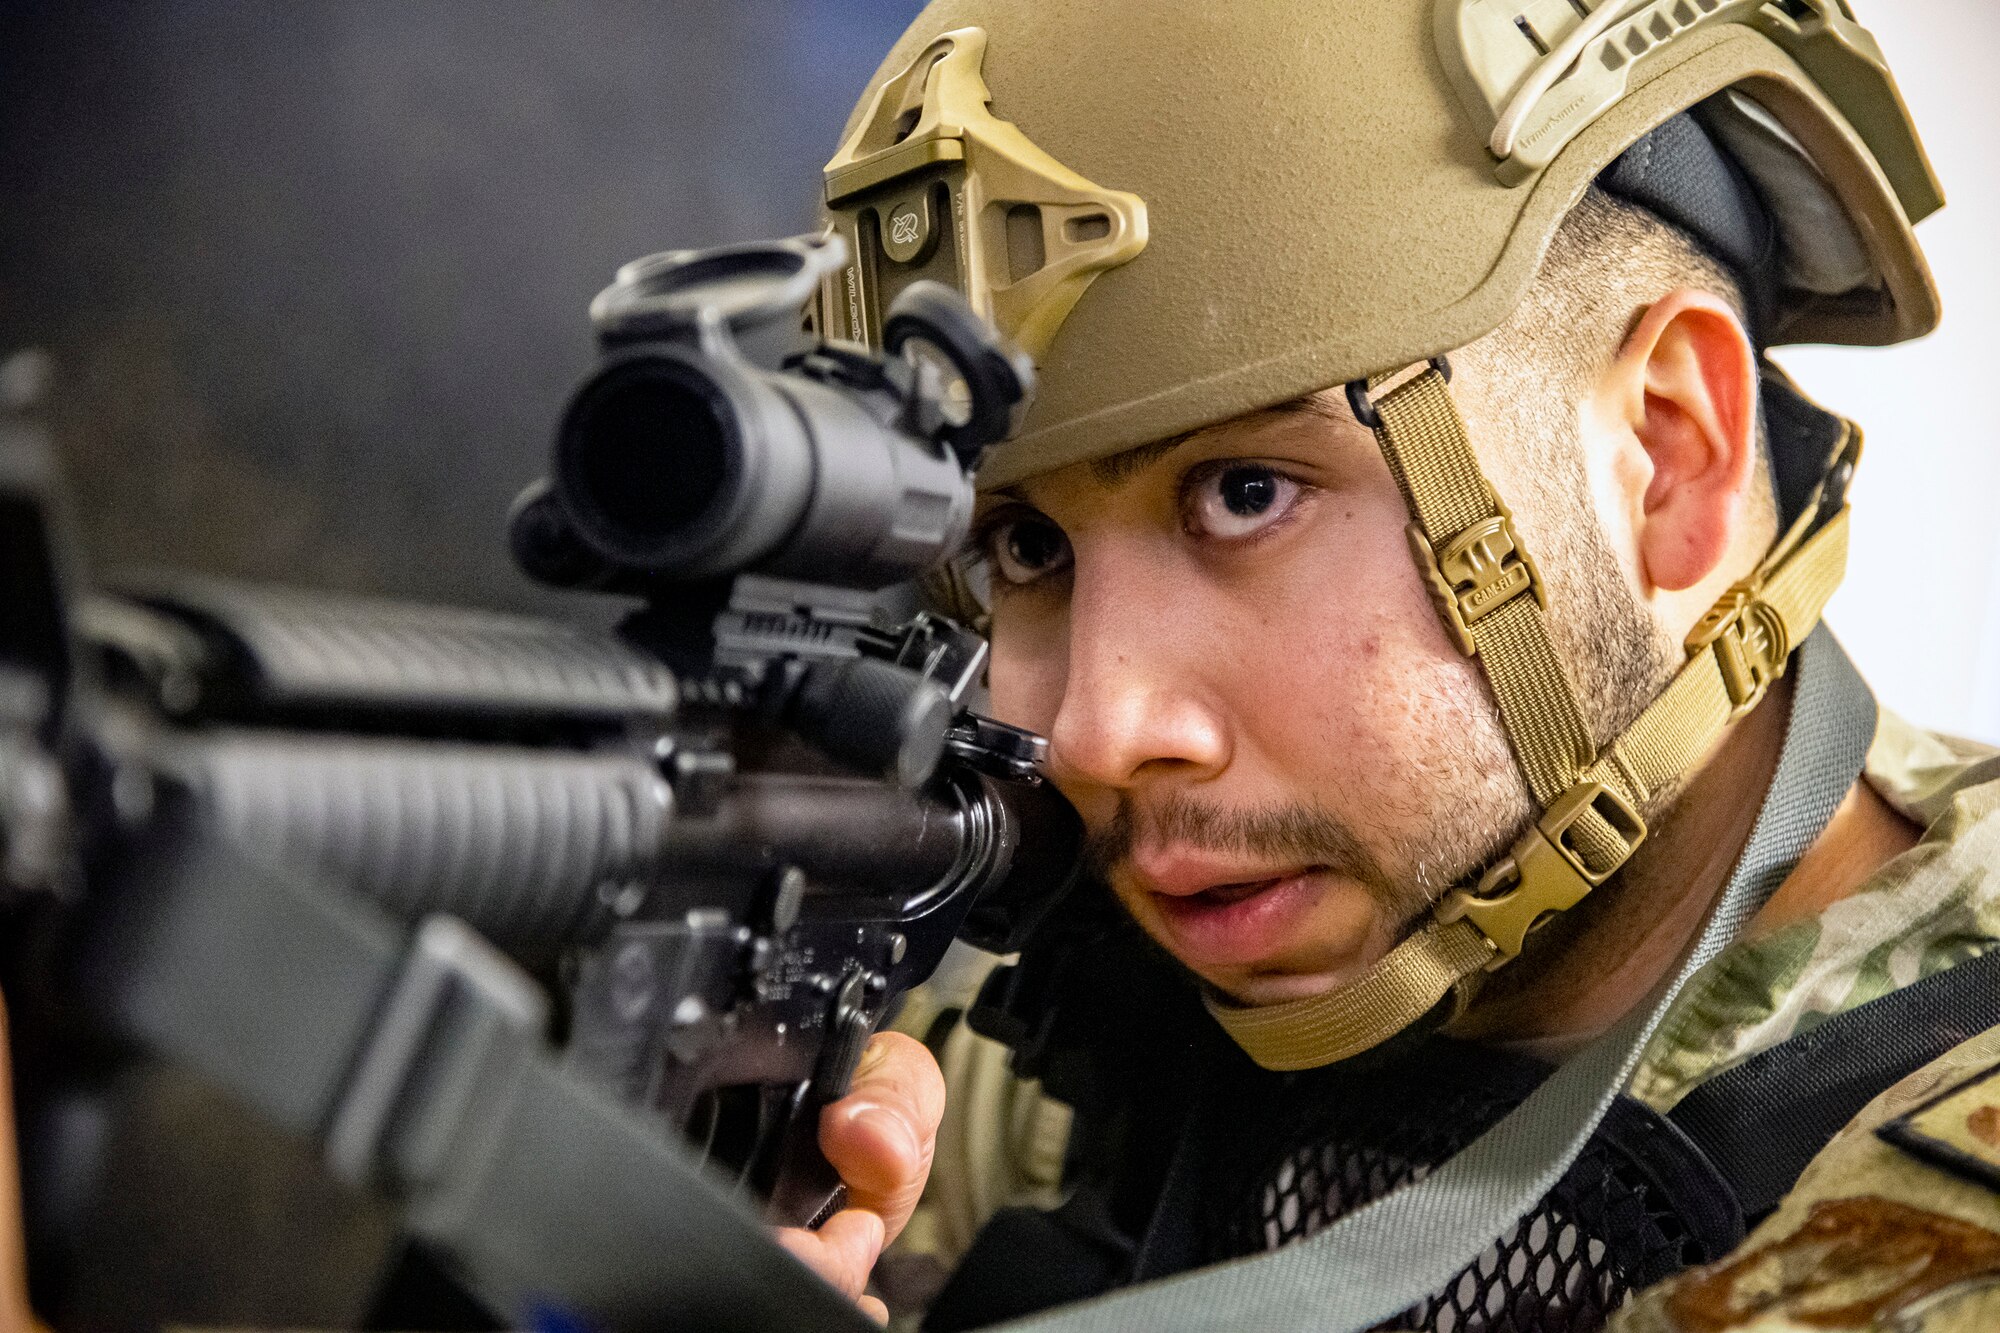 U.S. Air Force Senior Airman Luciano Medrano, 423d Security Forces Squadron arming use of force monitor, looks down the sight of a simulated M4 Carbine during an active shooter exercise at RAF Molesworth, England, Dec. 16, 2022. The 423d SFS and Medical Squadrons conducted the exercise to evaluate their overall readiness and response capabilities to an emergency situation. (U.S. Air Force photo by Staff Sgt. Eugene Oliver)